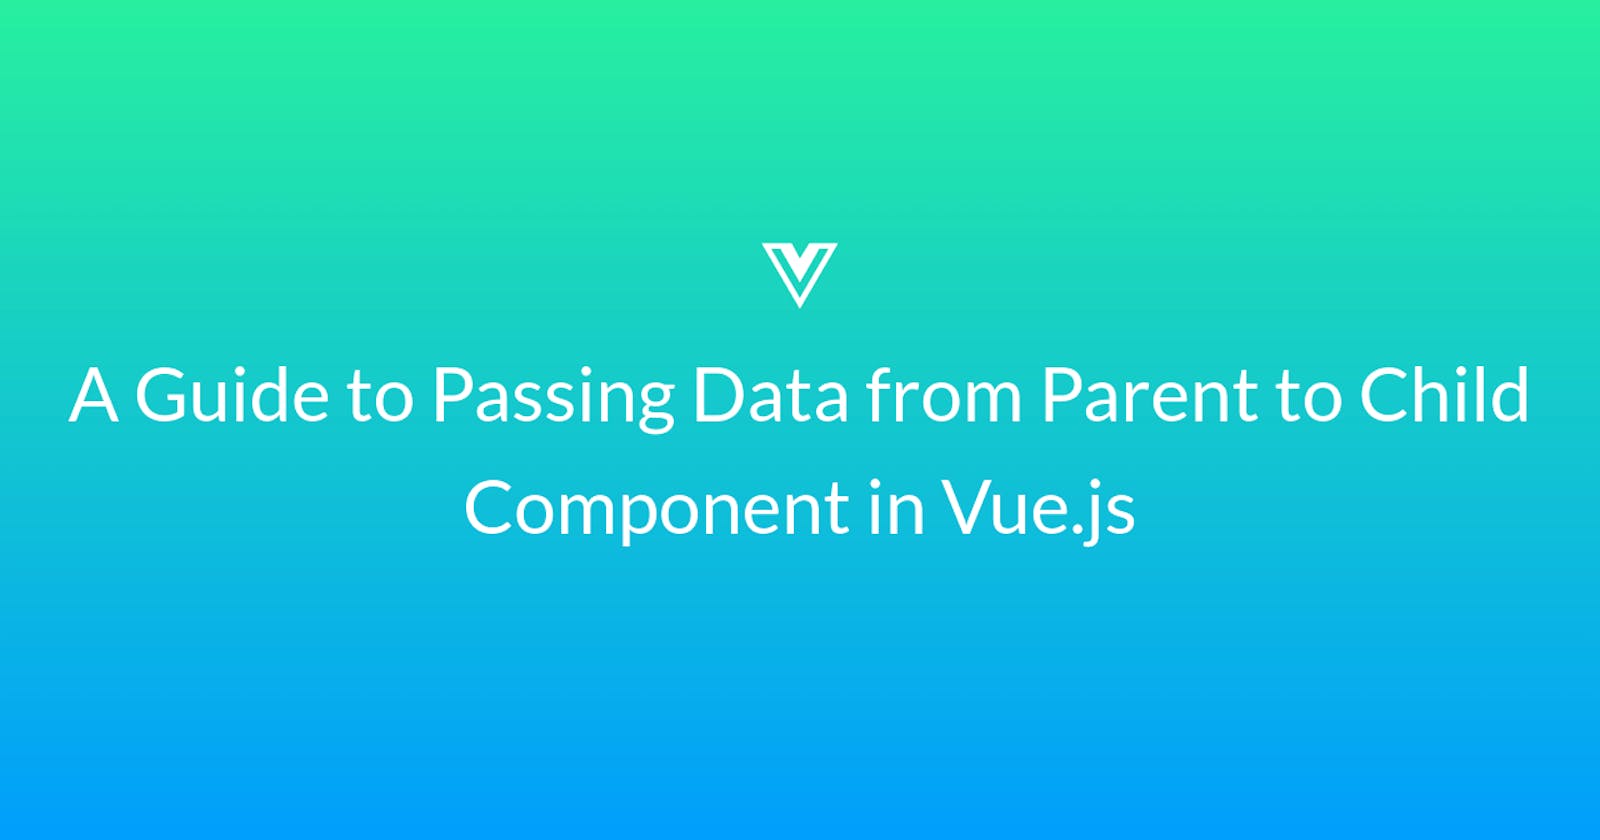 A Guide to Passing Data from Parent to Child Component in Vue.js